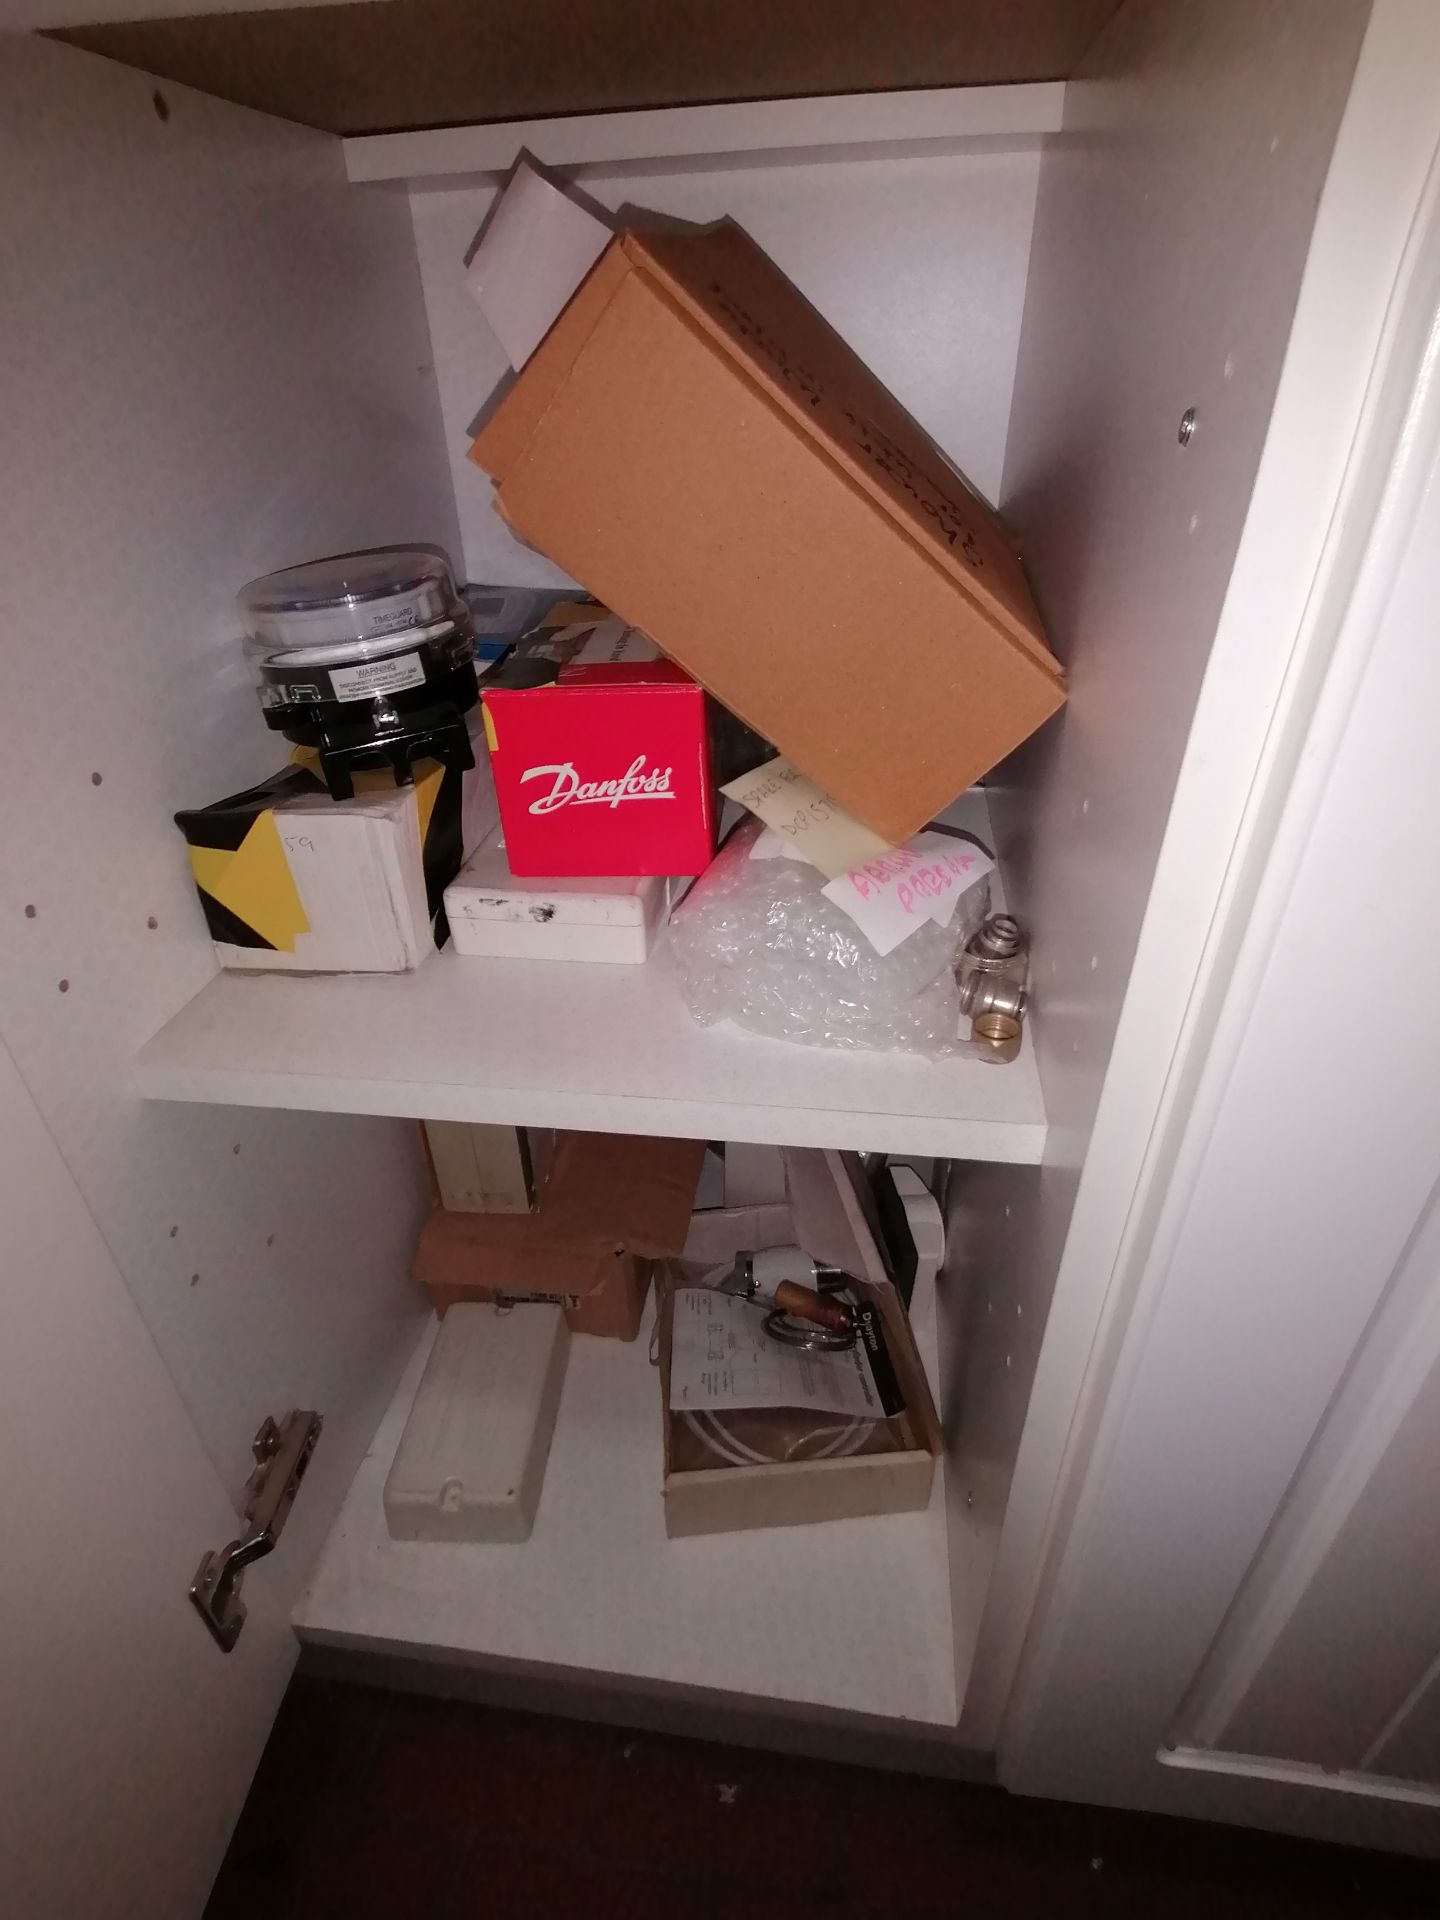 Contents only of starage cupboards as shown - Image 6 of 30